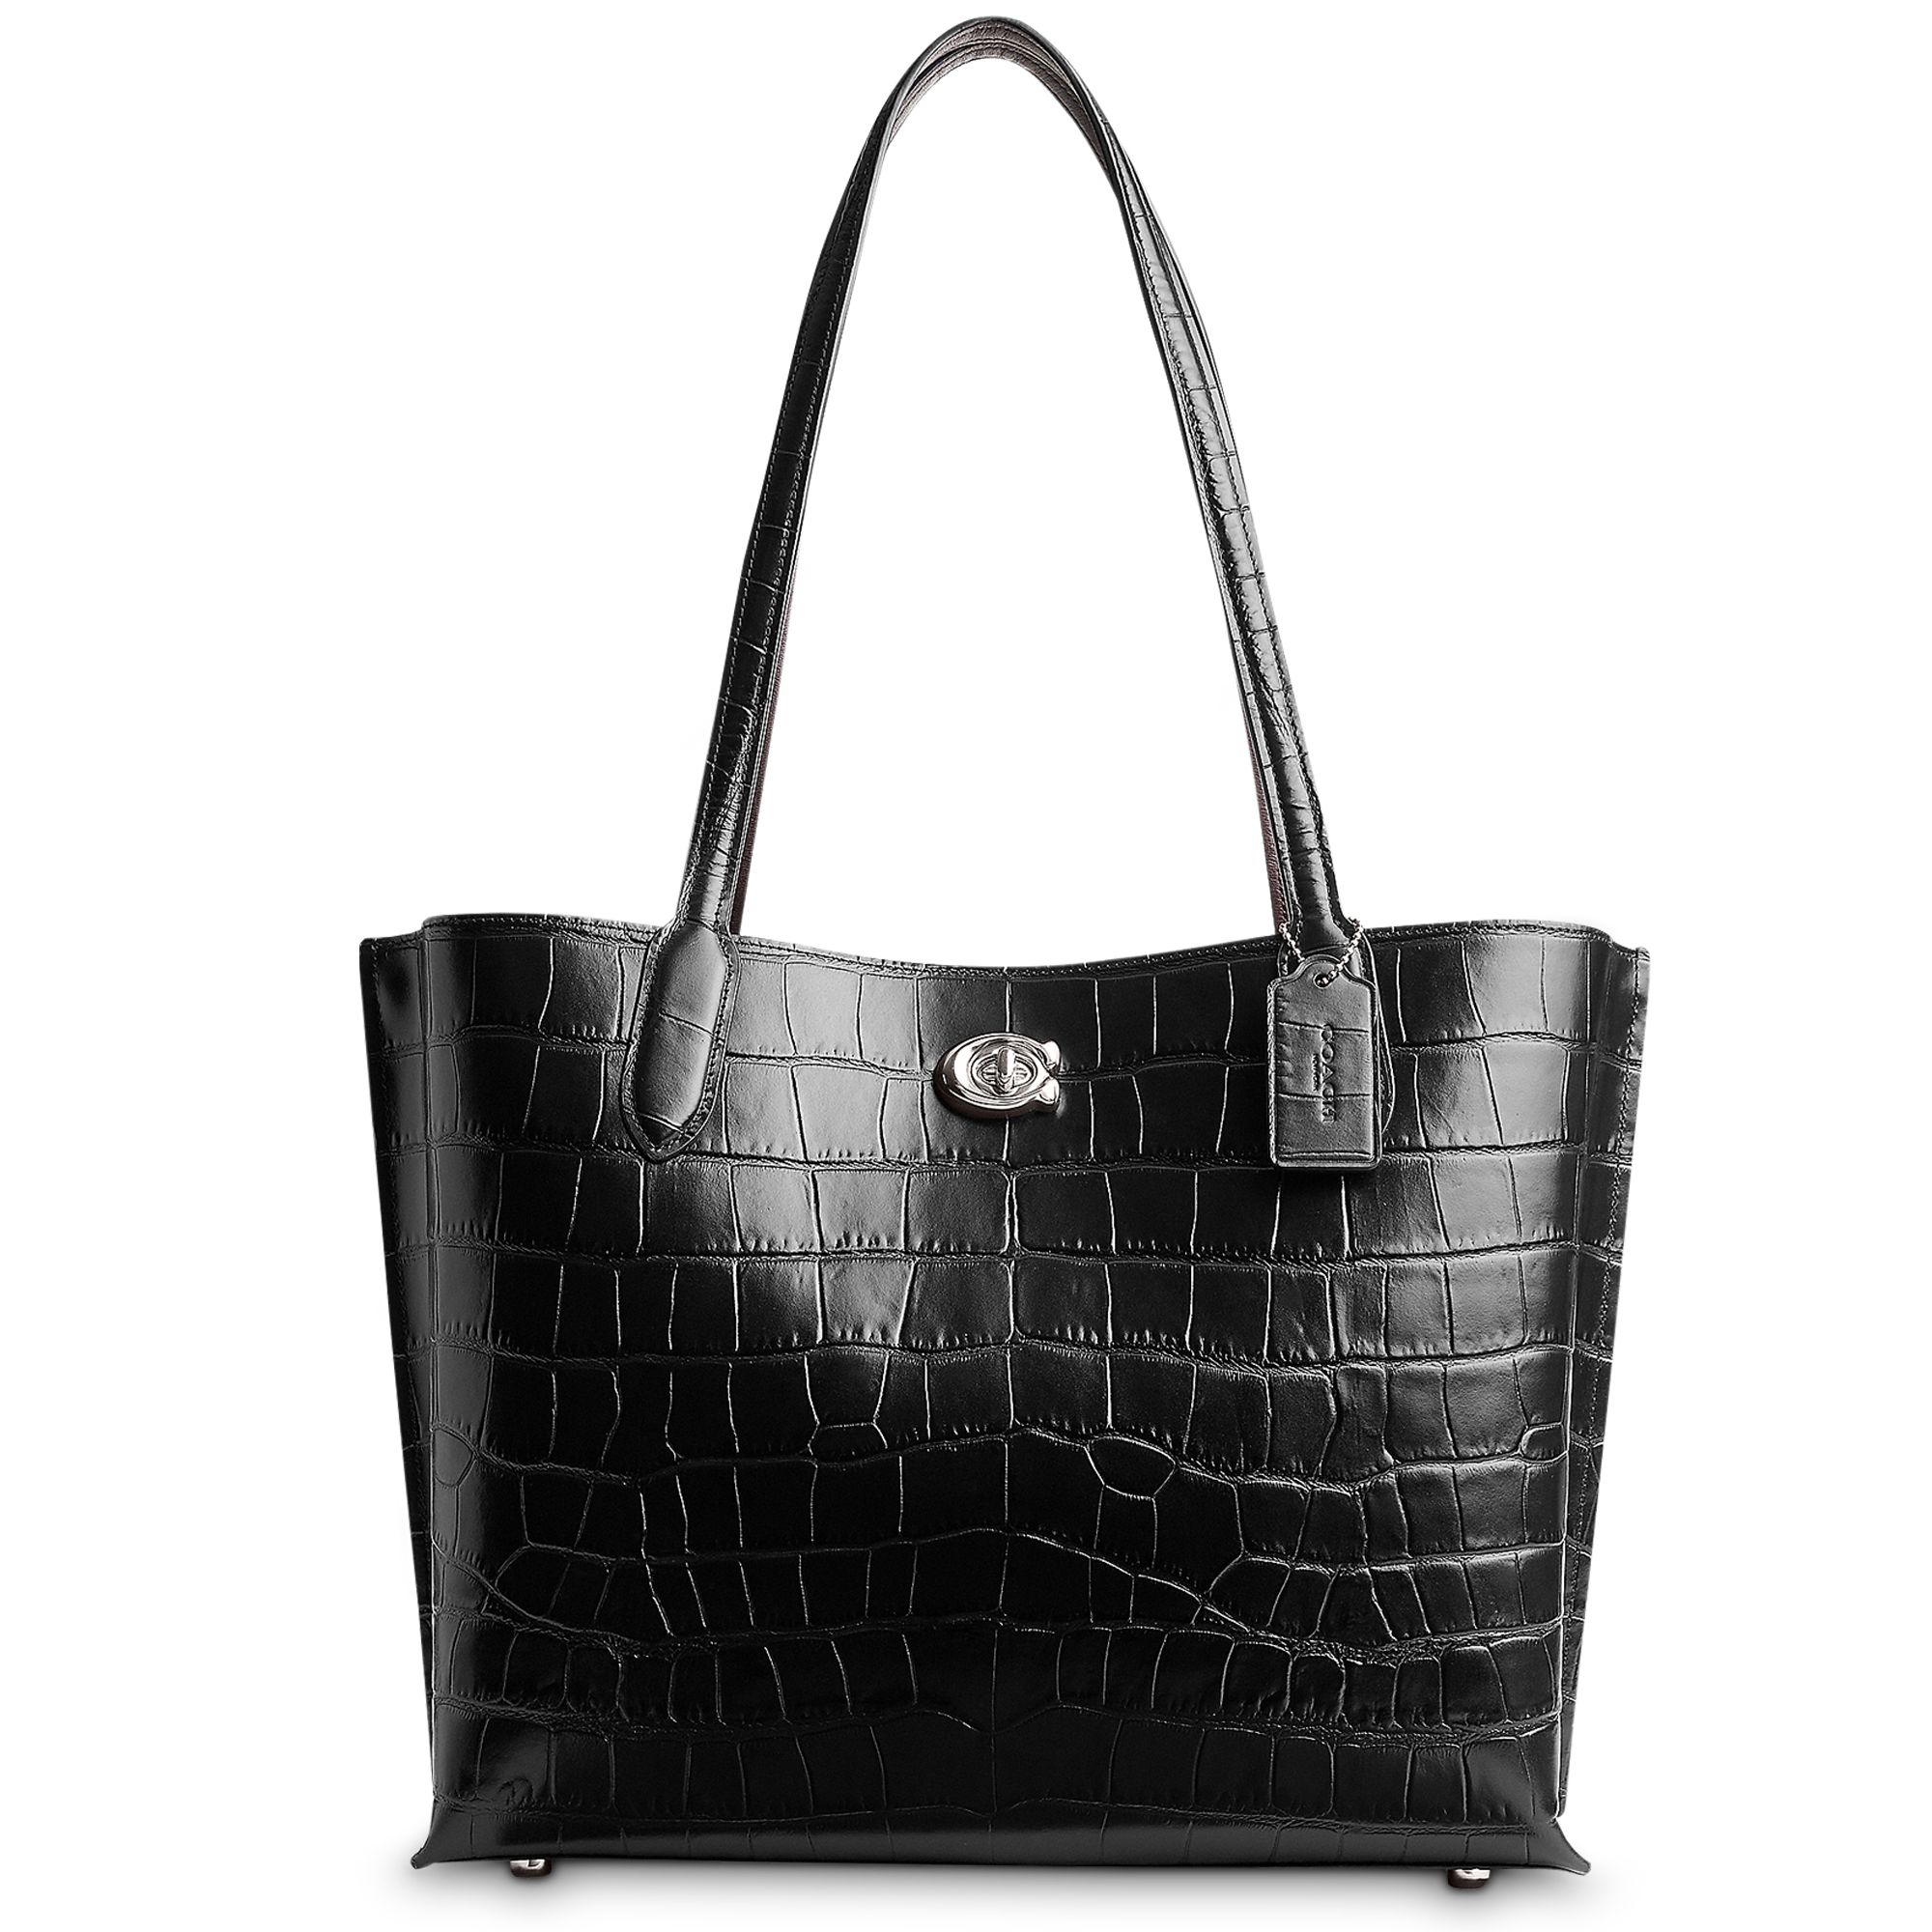 Coach Willow Croc Leather Tote Bag, Black